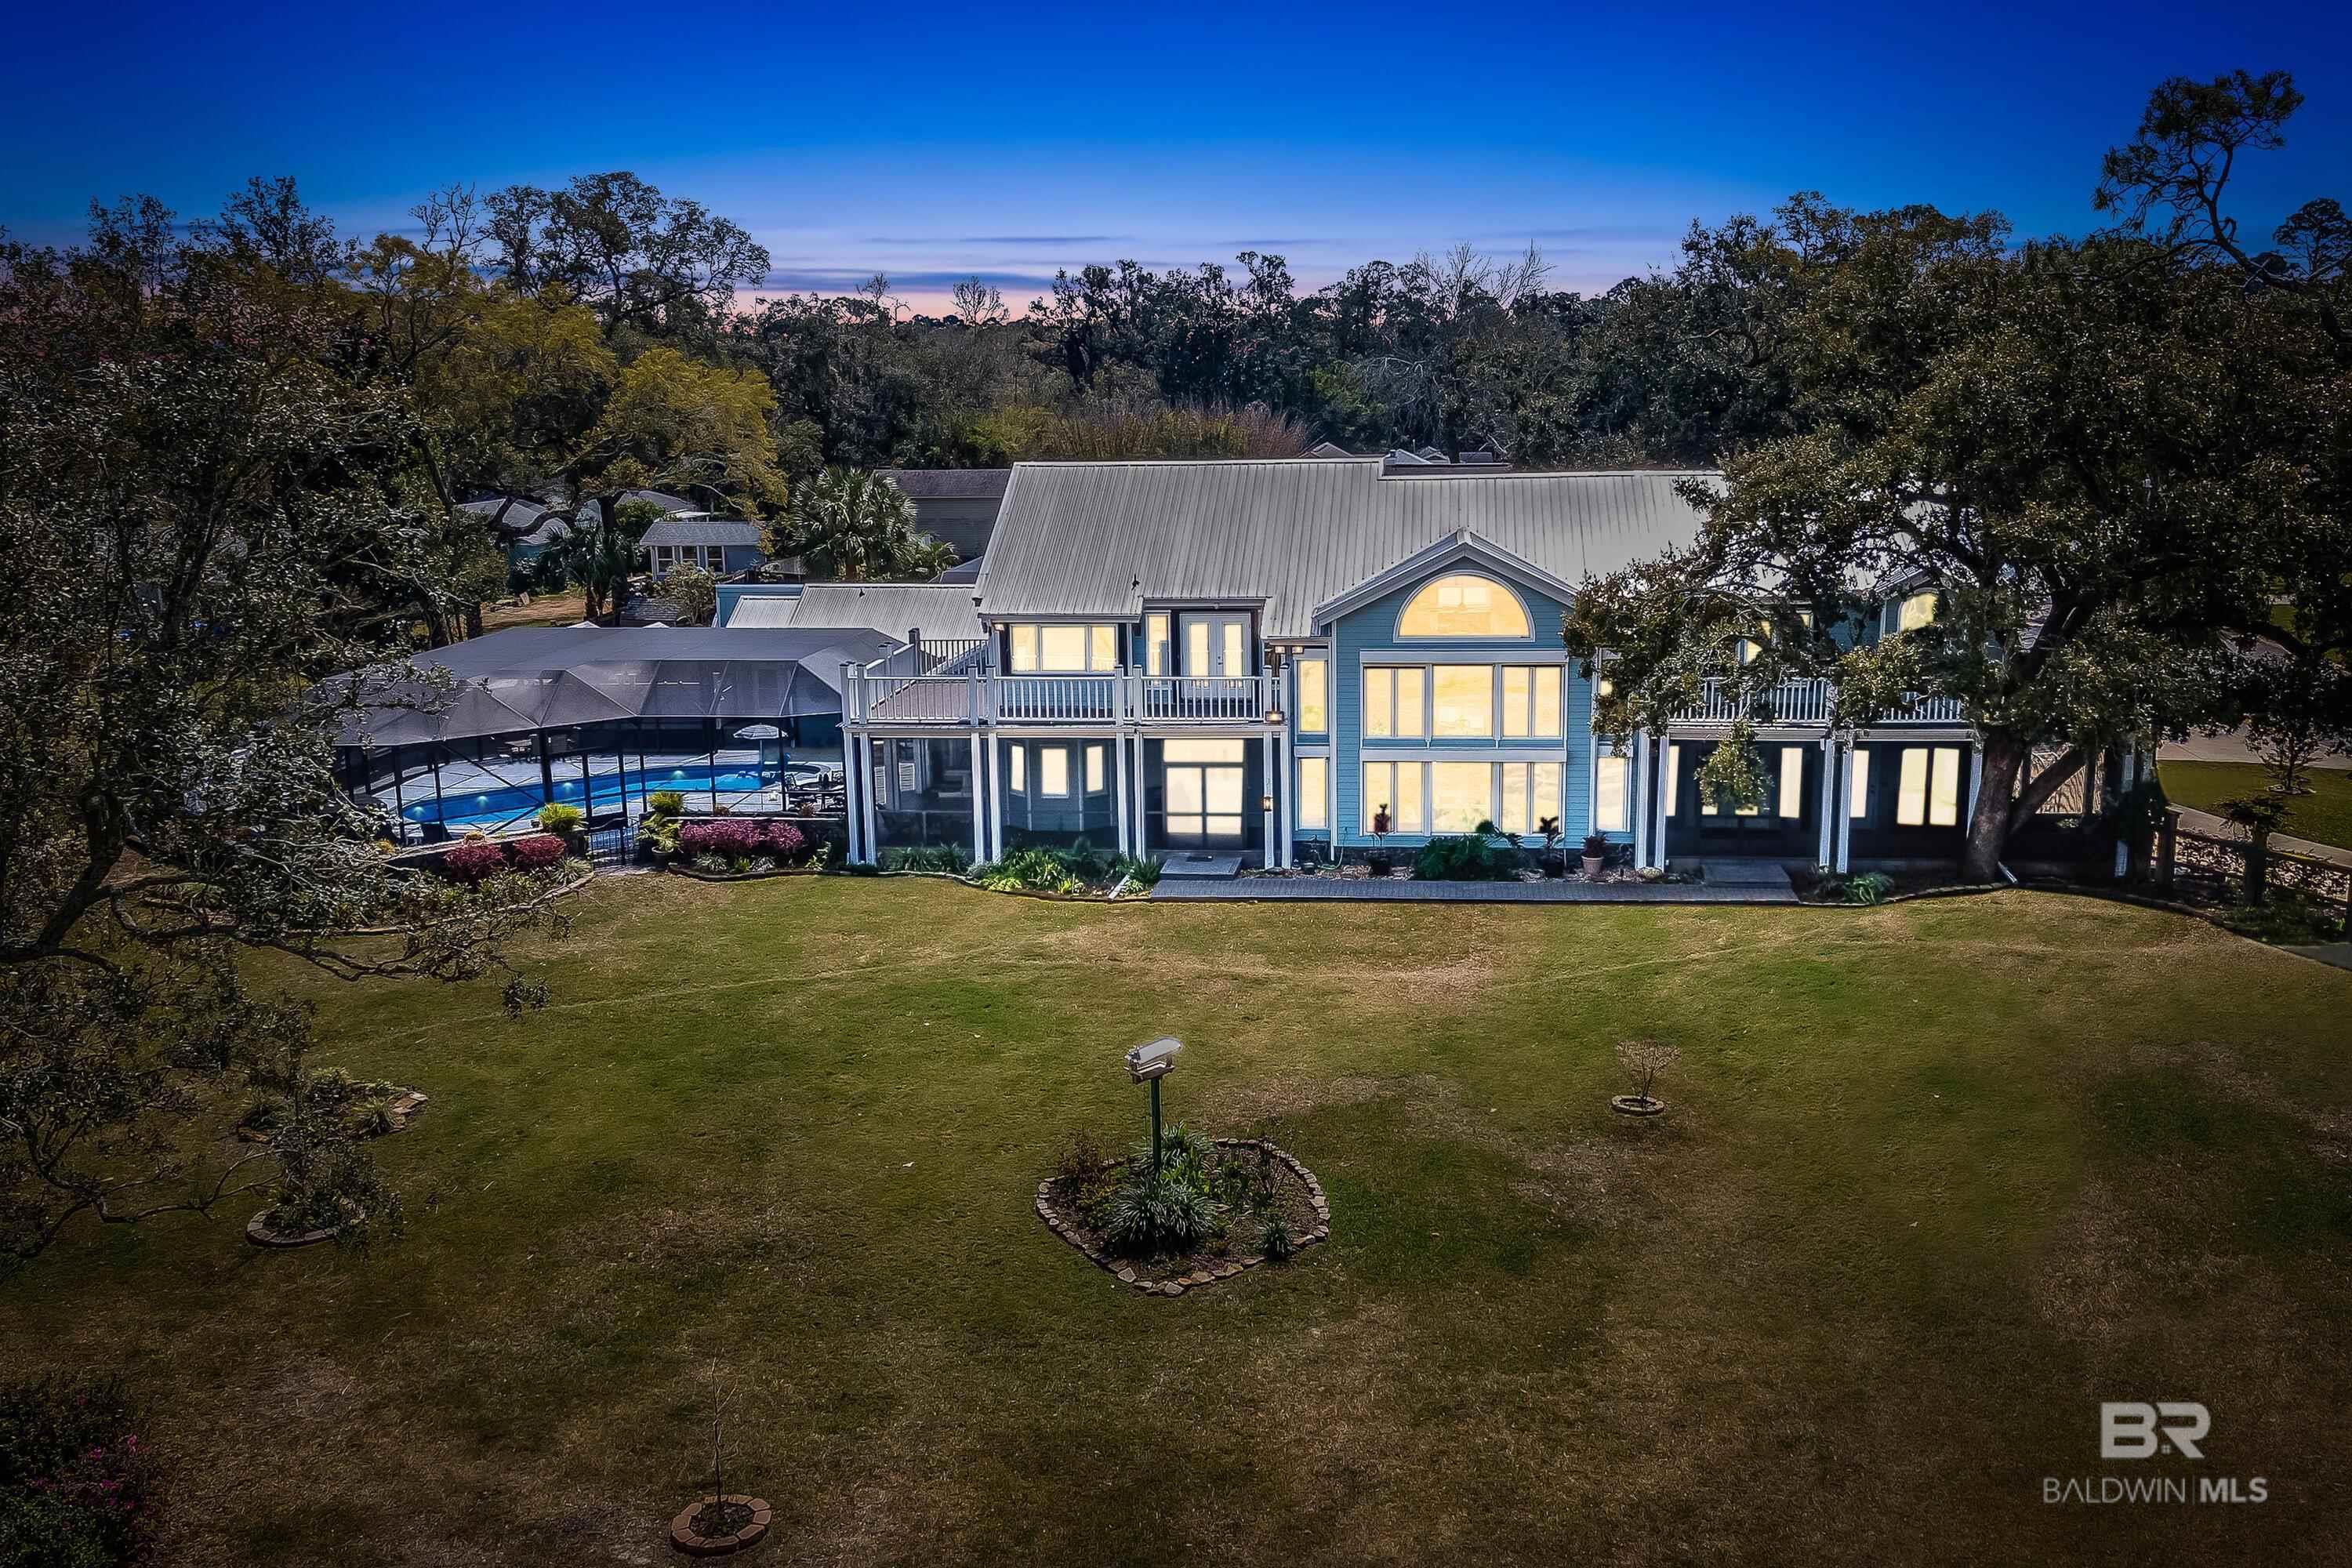 This awe inspiring Perdido Bay waterfront estate located on a high/dry lot dotted with magnificent heritage oaks and mature landscaping is minutes from downtown Pensacola, award winning Perdido Key Beaches, and Foley, AL. From its soaring ceilings, stone-faced fireplace, to multiple screened porches and fully screened lanai with a custom saltwater pool to the huge game room, this home is loaded with spaces and places for the ultimate coastal lifestyle! All manner of enjoyment avails itself here! Set on 1.35=/- acres with 145' of waterfront, there is a brand new boathouse with dual jet ski lifts,a 17K# boatlift, a sundeck and porch swing for leisurely days on the bay! Dolphin and pelican frolic and the sunsets are spectacular! The back lawn is fenced and large enough for volleyball badmitten and croquet, and there is a perfect outdoor bar area and firepit. The home welcomes you with a two-story entryway, leading to the grand family room w/cathedral ceilings,gas ventless fireplace and a stunning wall of windows overlooking the lawn and waterfront. Formally, or informally, cooking and dining will be a pleasure as the well equipped kitchen has double Thermador ovens, 6 burner gas cooktop, Sub Zero fridge, warming drawer, wine cooler and two dishwashers. Casual breakfast nook, pool side dining, or formal affair in the elegant dining room are all possibilities! Stage sumptuous meals in the Butler Pantry. 8 of 10 rooms has a waterview, and screened porch or waterfront balcony, each with either composite material or cool decking. A private balcony off of the master suite adds to the elegance of the spacious room. The master bath spa is luxuriously appointed with a large soaking tub, separate shower, granite vanities and an enormous wardrobe room. 2 upstairs bedrooms share a balcony and have private bathrooms. 1 ground level bedroom has a hall bath.NEW,NEW,NEW: HVAC & Duct, Metal roof,60K generator w/400 amp tx switch, elevator, exterior paint, LED flood lights, security.